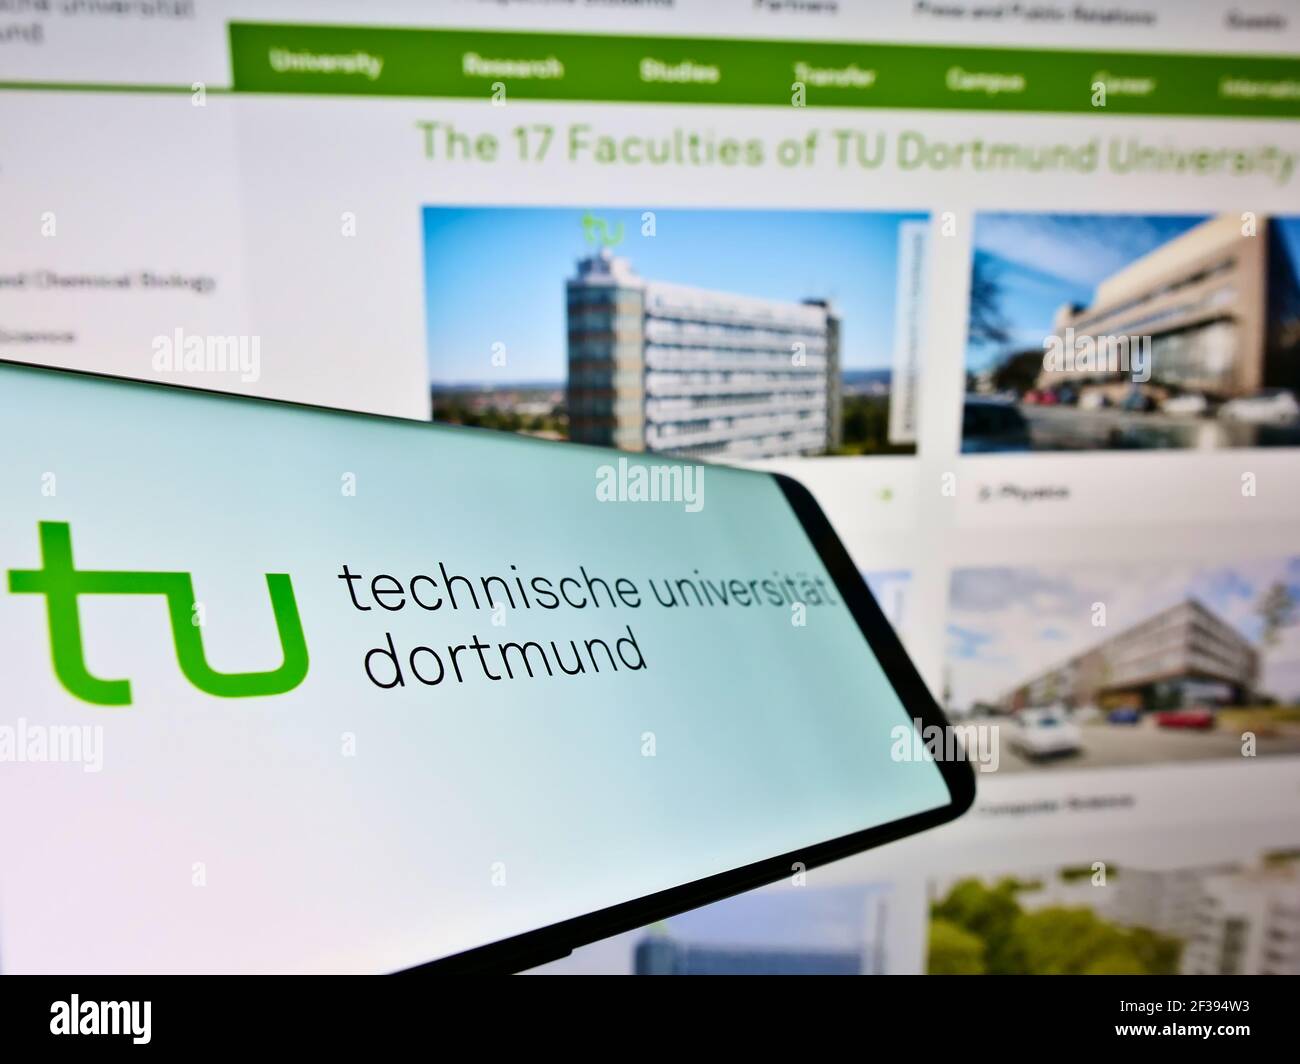 Smartphone with logo of German education institution Technical University of Dortmund on screen in front of website. Focus on center of phone display. Stock Photo